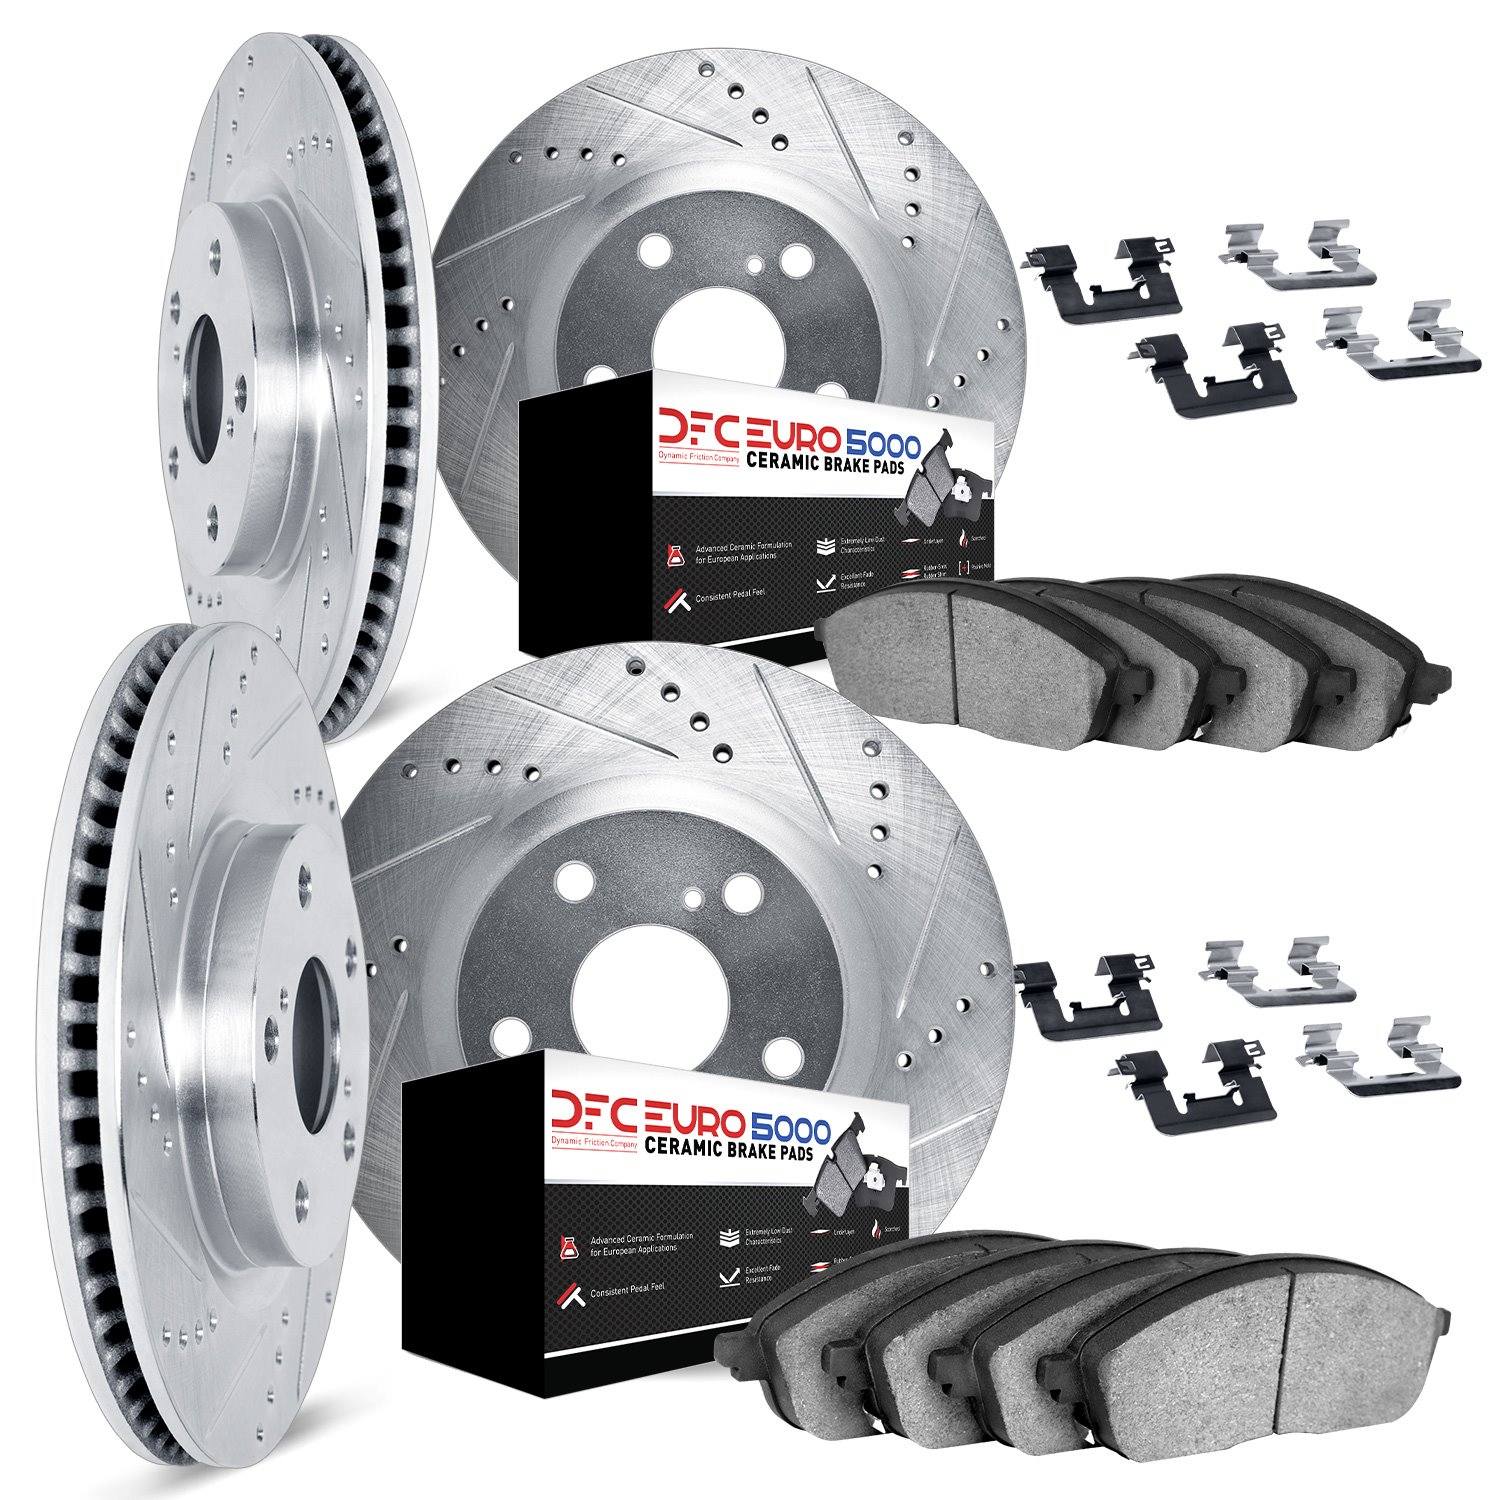 7614-31030 Drilled/Slotted Brake Rotors w/5000 Euro Ceramic Brake Pads Kit & Hardware [Silver], 2012-2016 BMW, Position: Front a